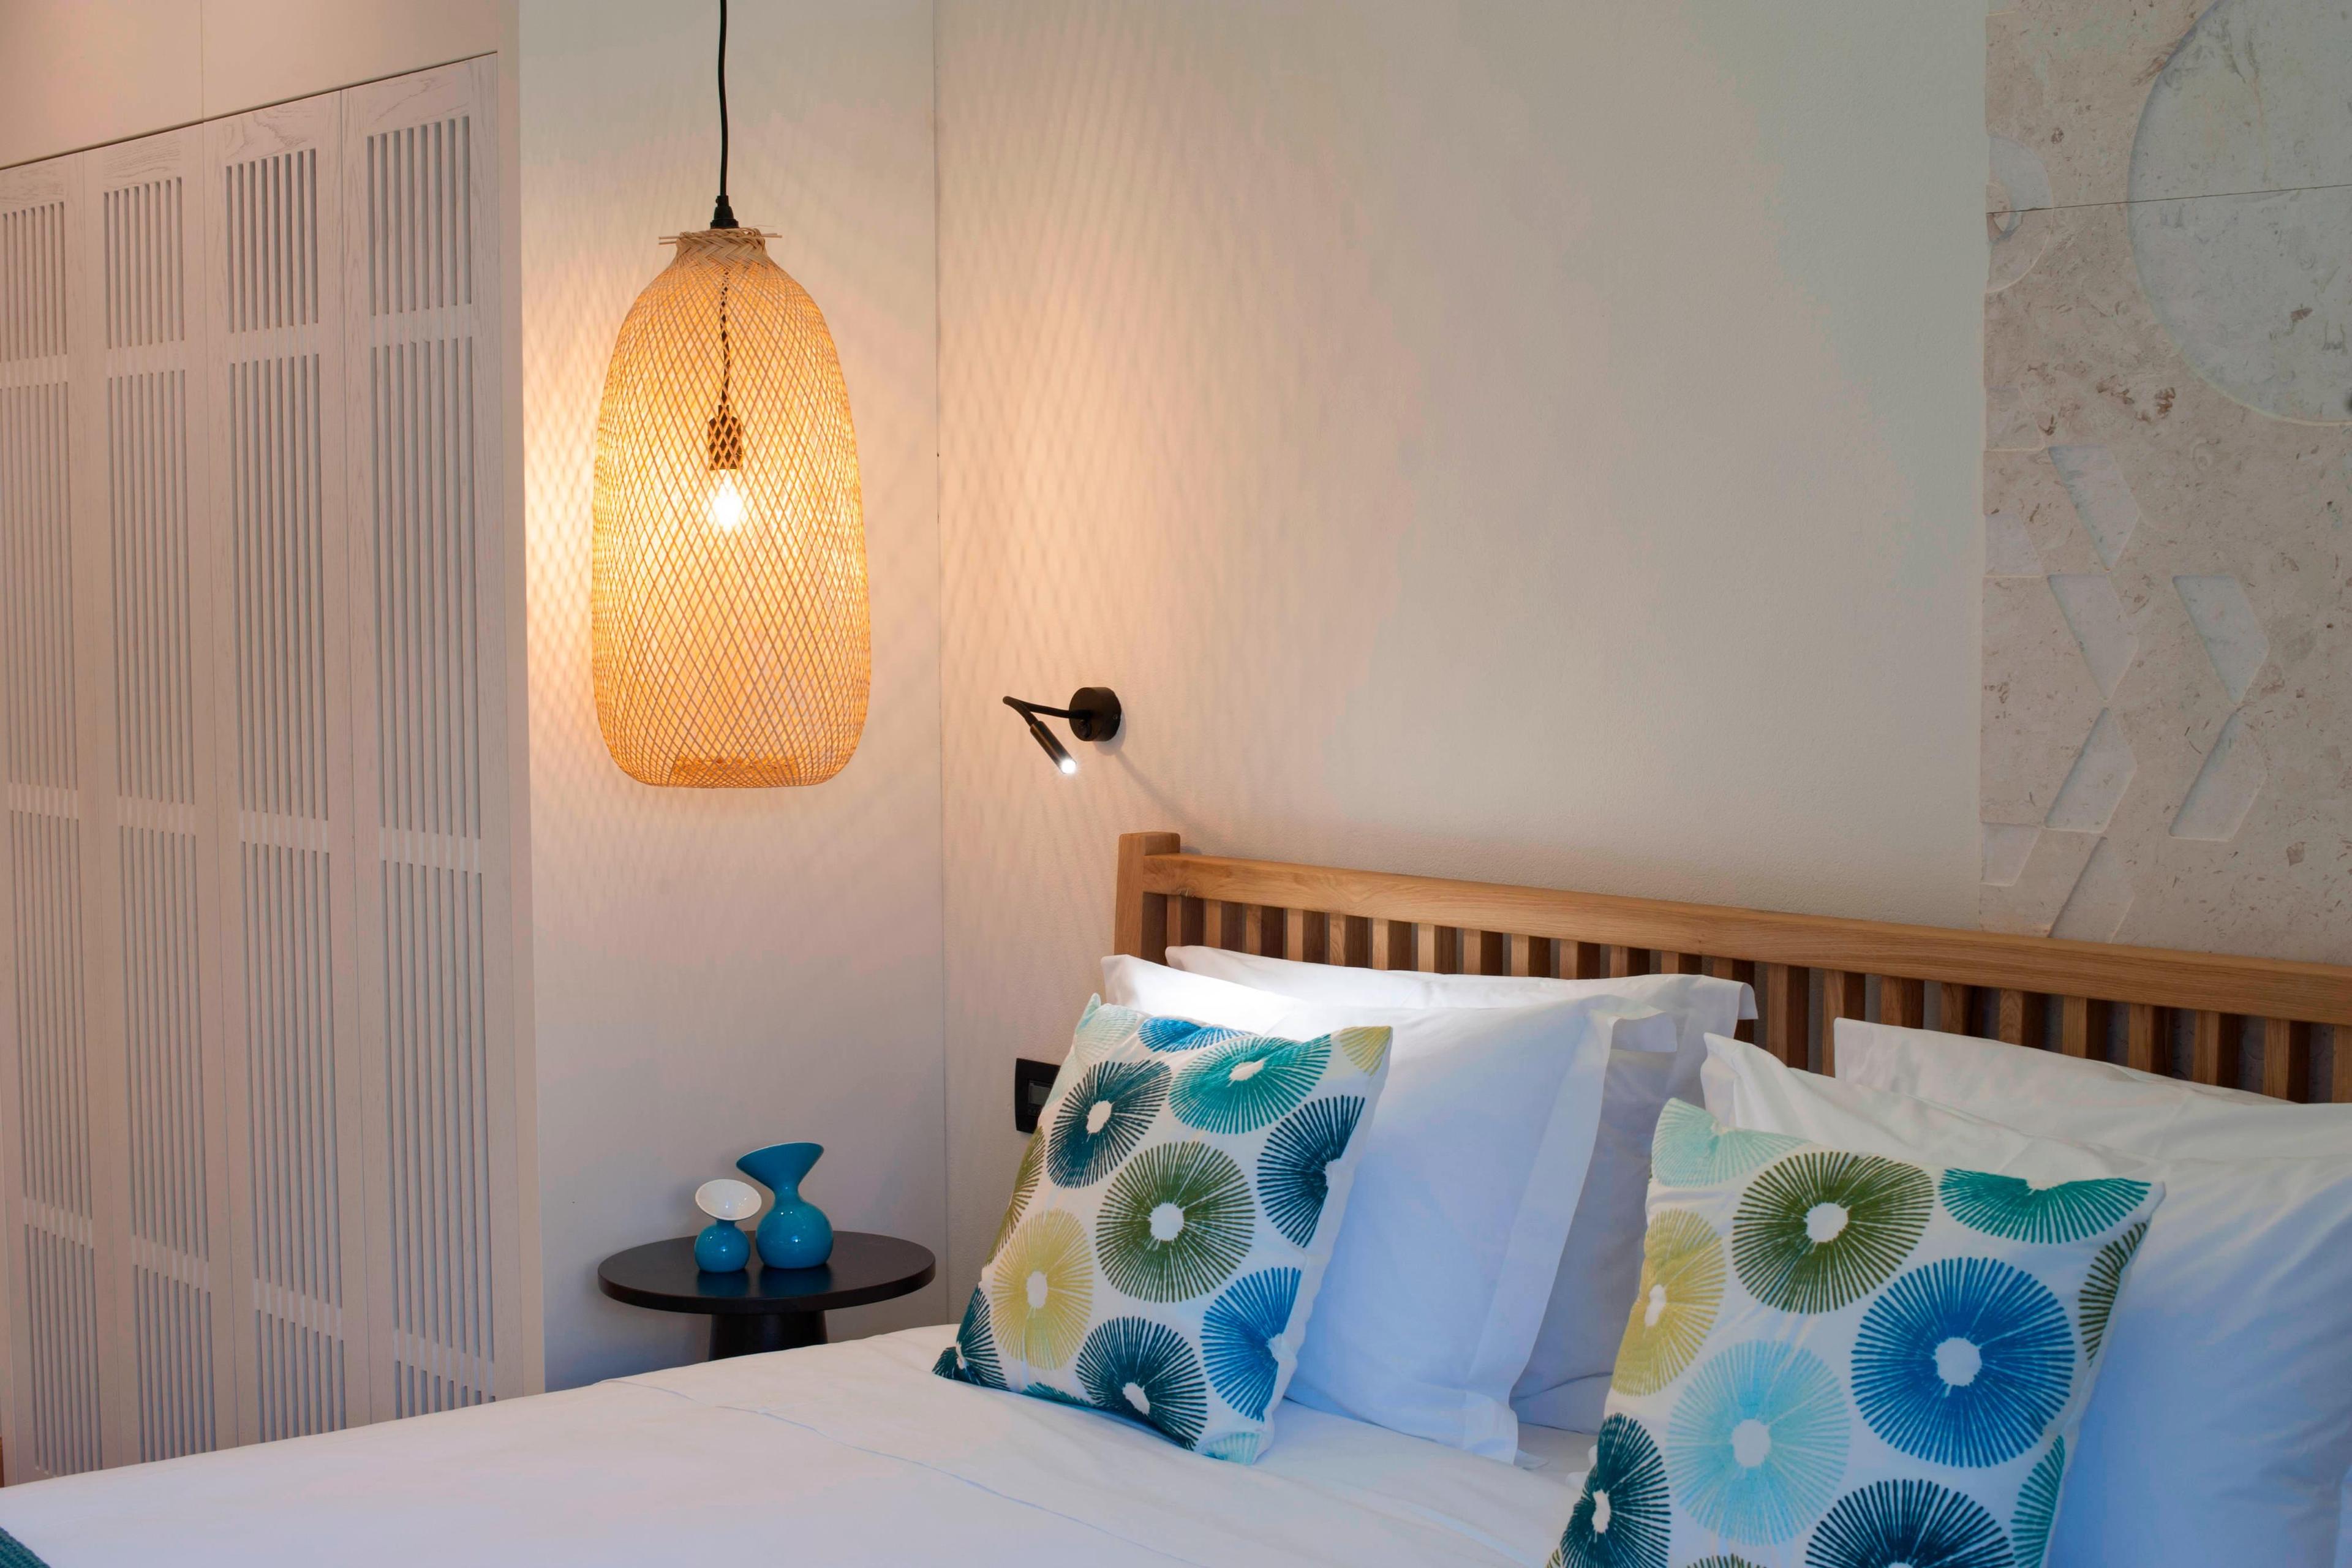 Light color hues dominate the upbeat retreat pool view guest bedroom.